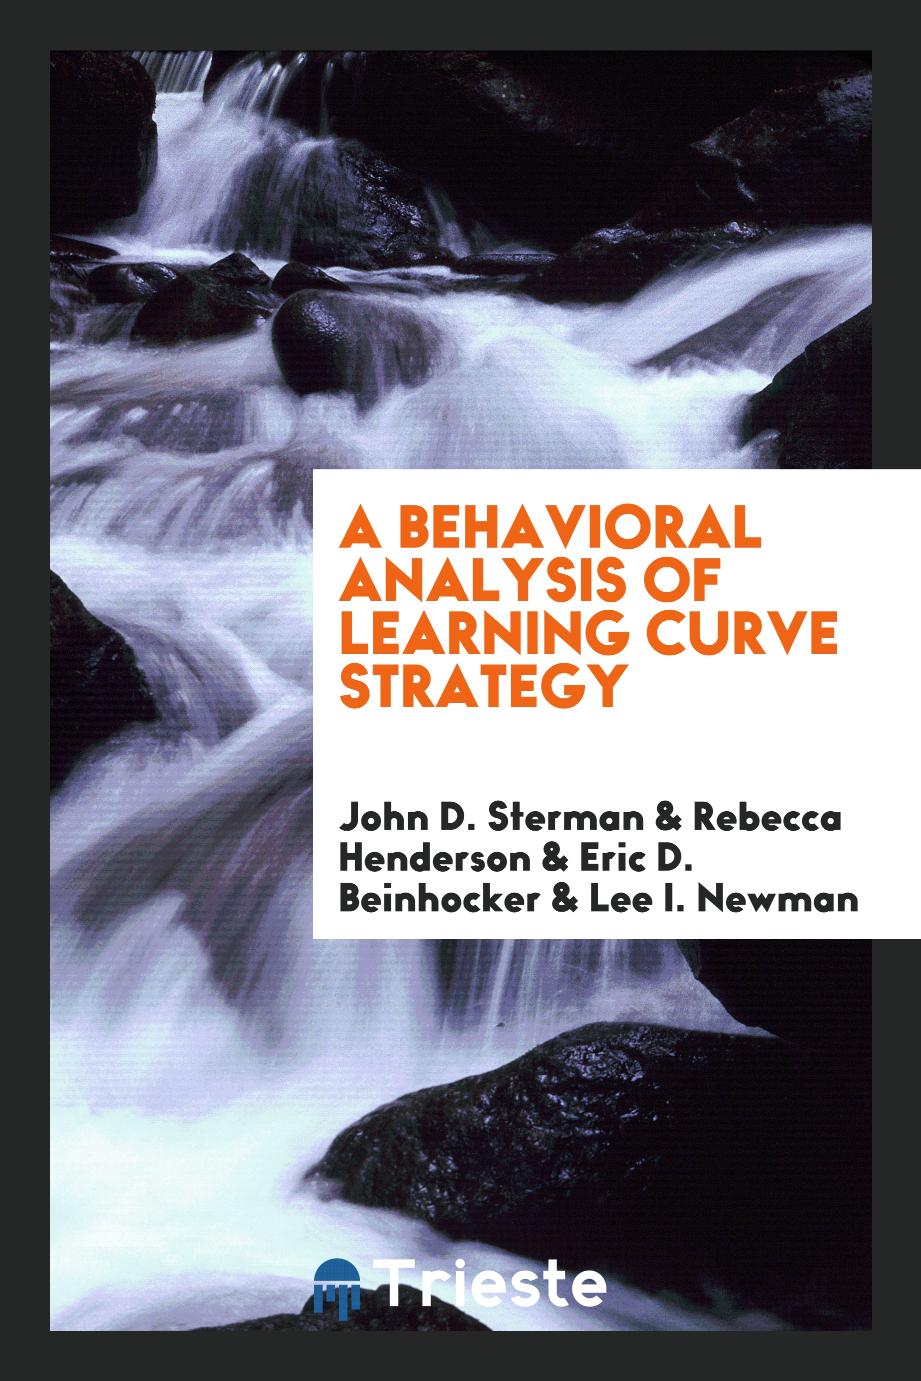 A behavioral analysis of learning curve strategy